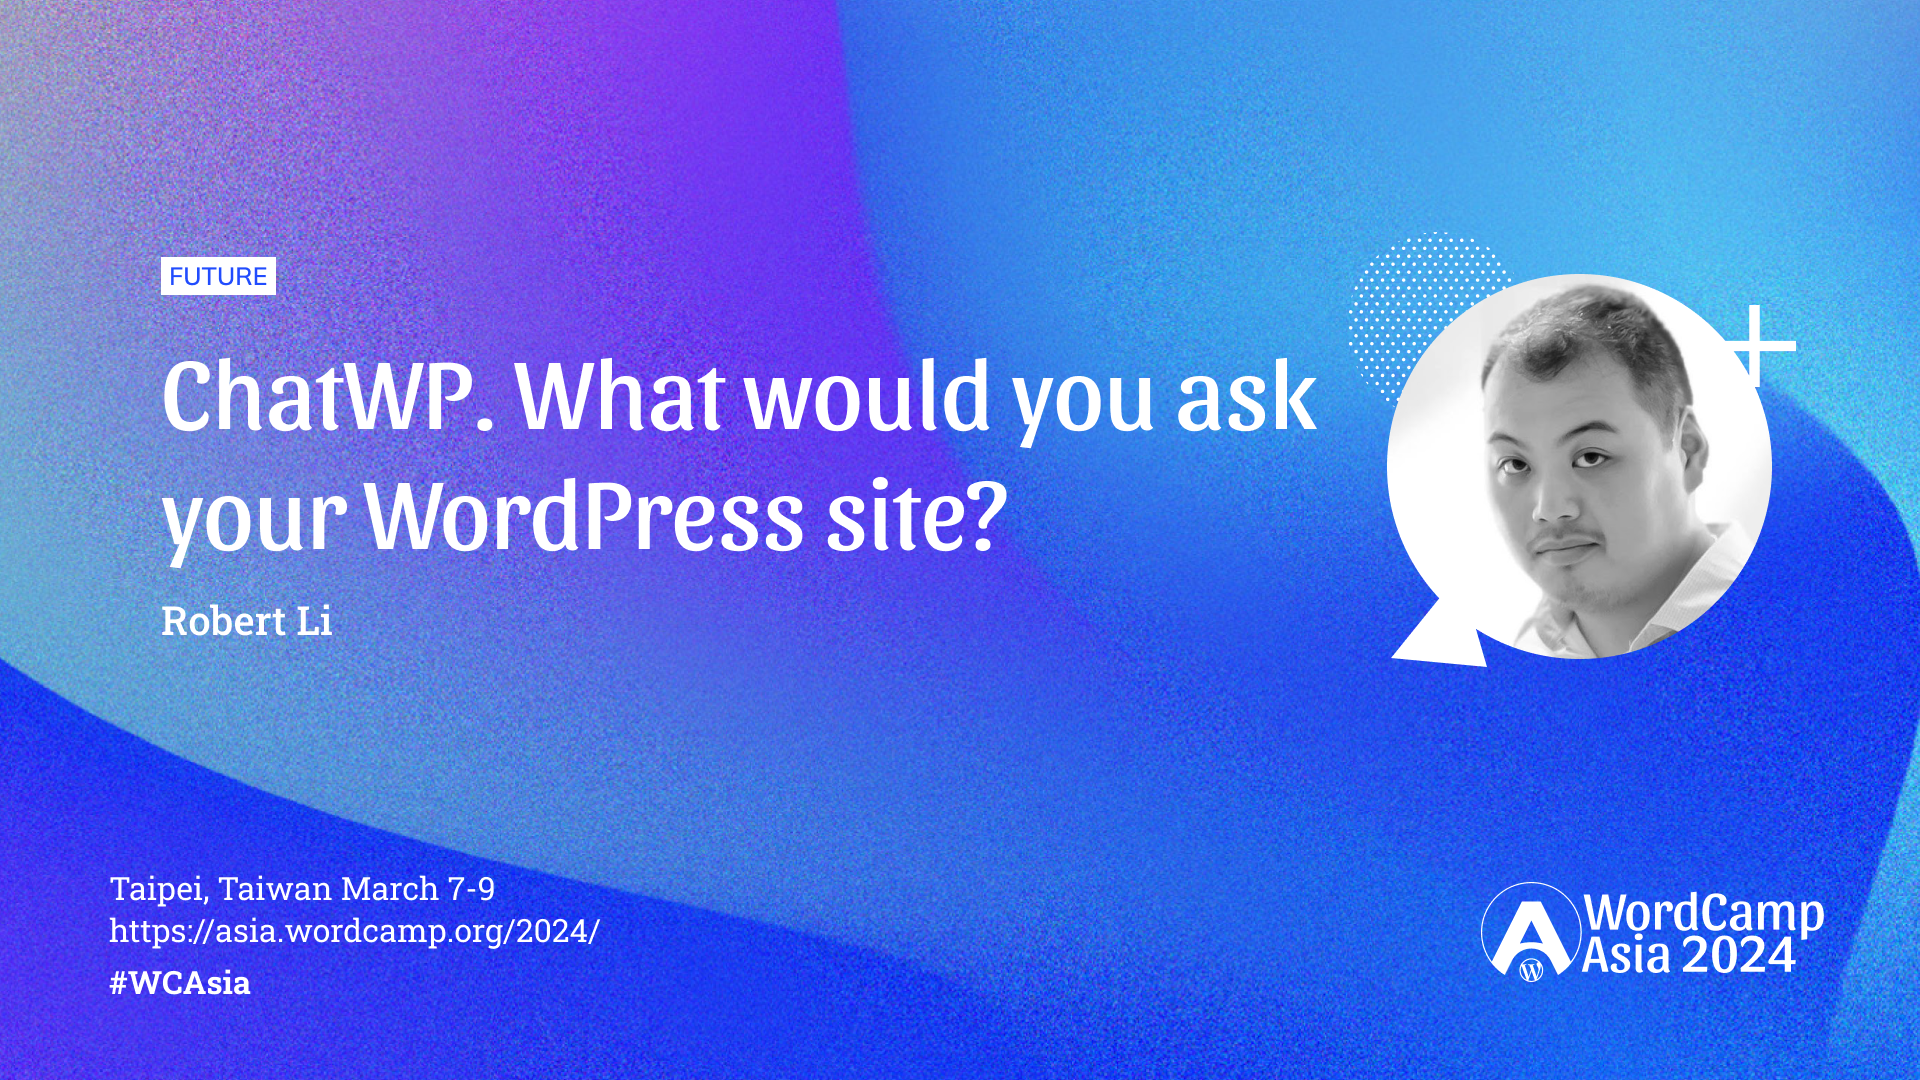 ChatWP. What would you ask your WordPress site?